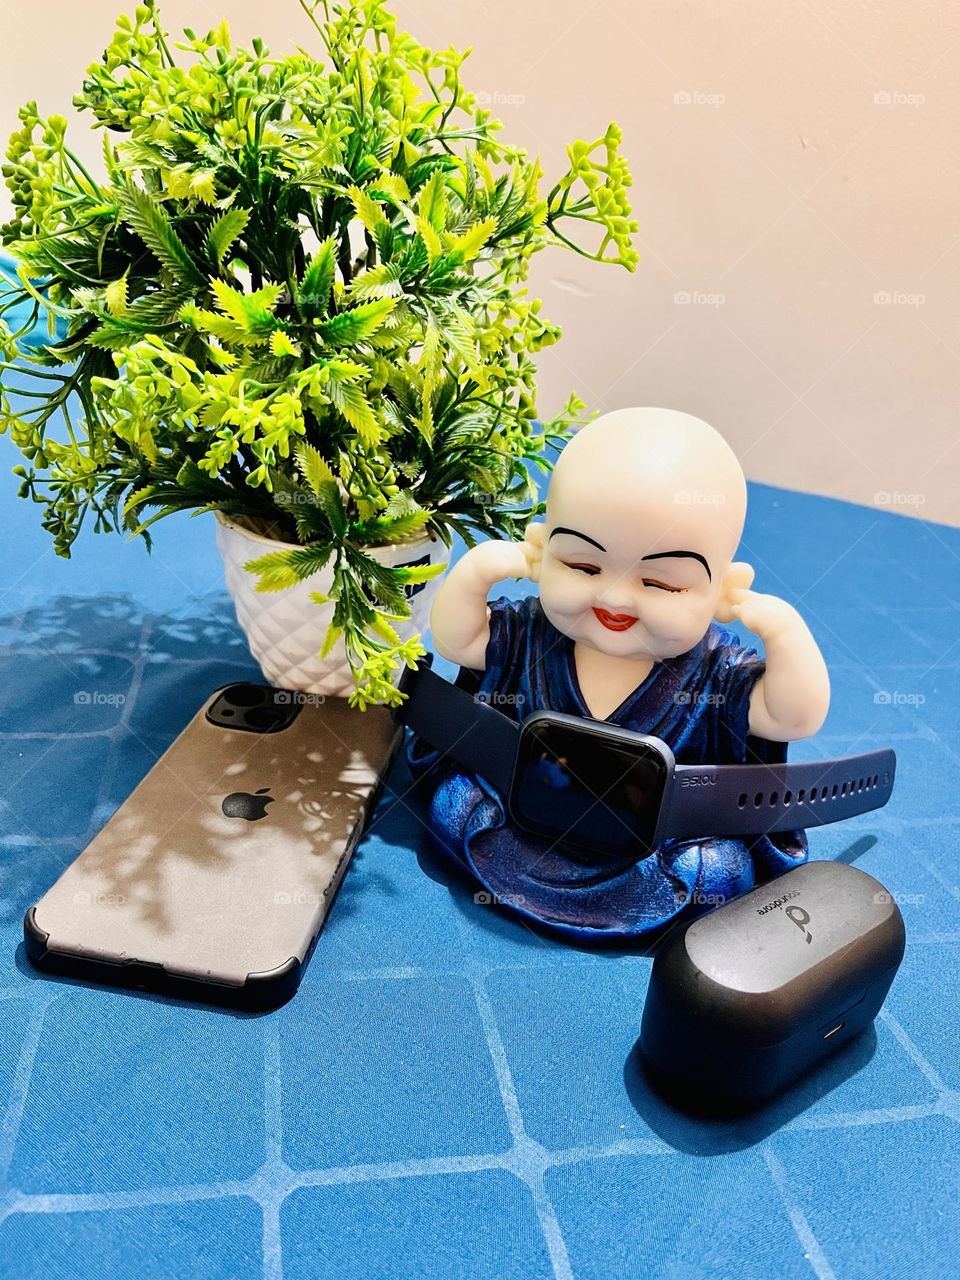 Buddha is spending time with electronics